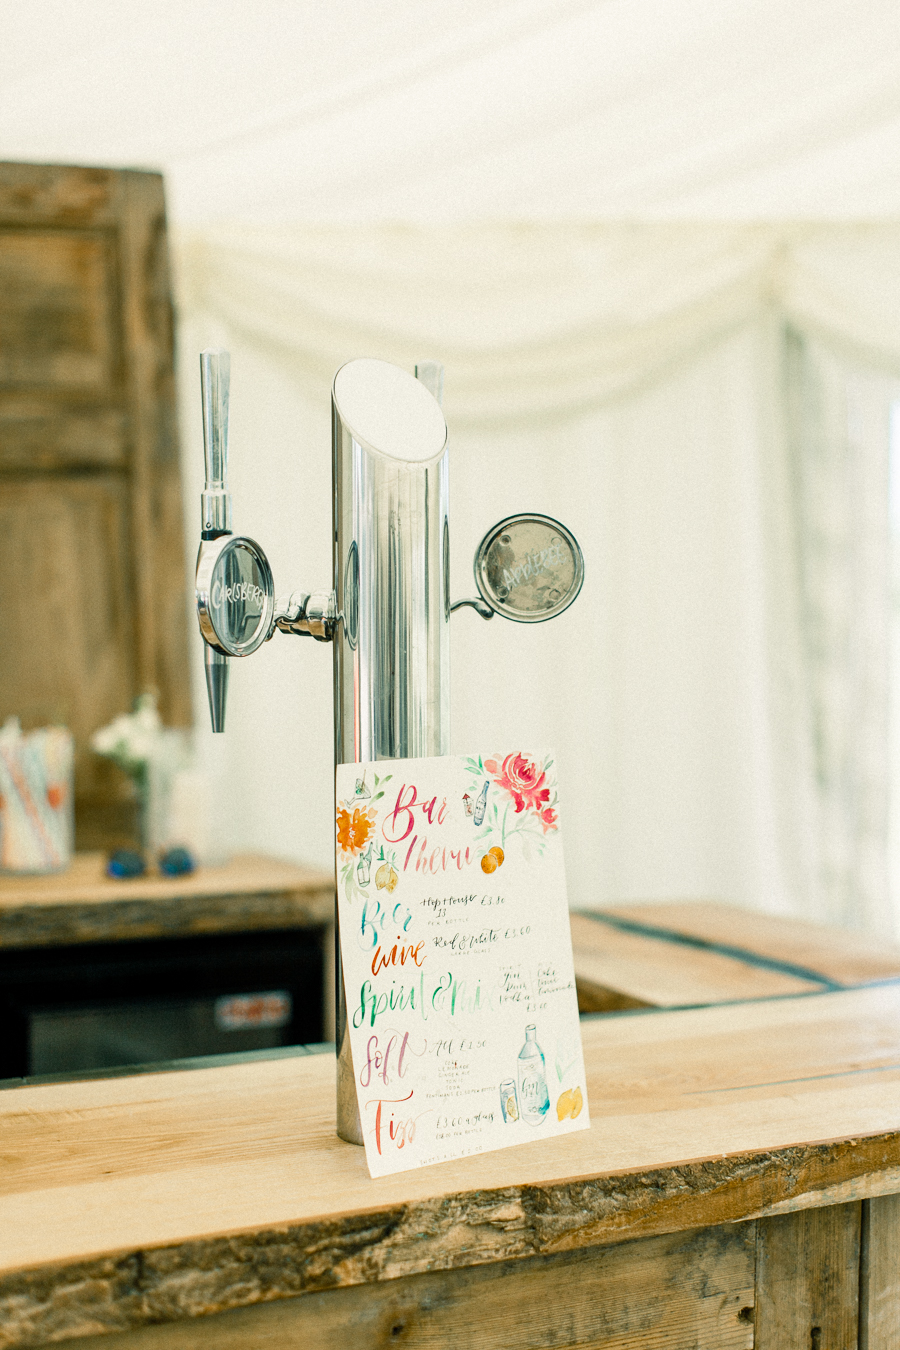 Jordans Courtyard rustic wedding styling ideas with images by Liz Baker Photography (15)